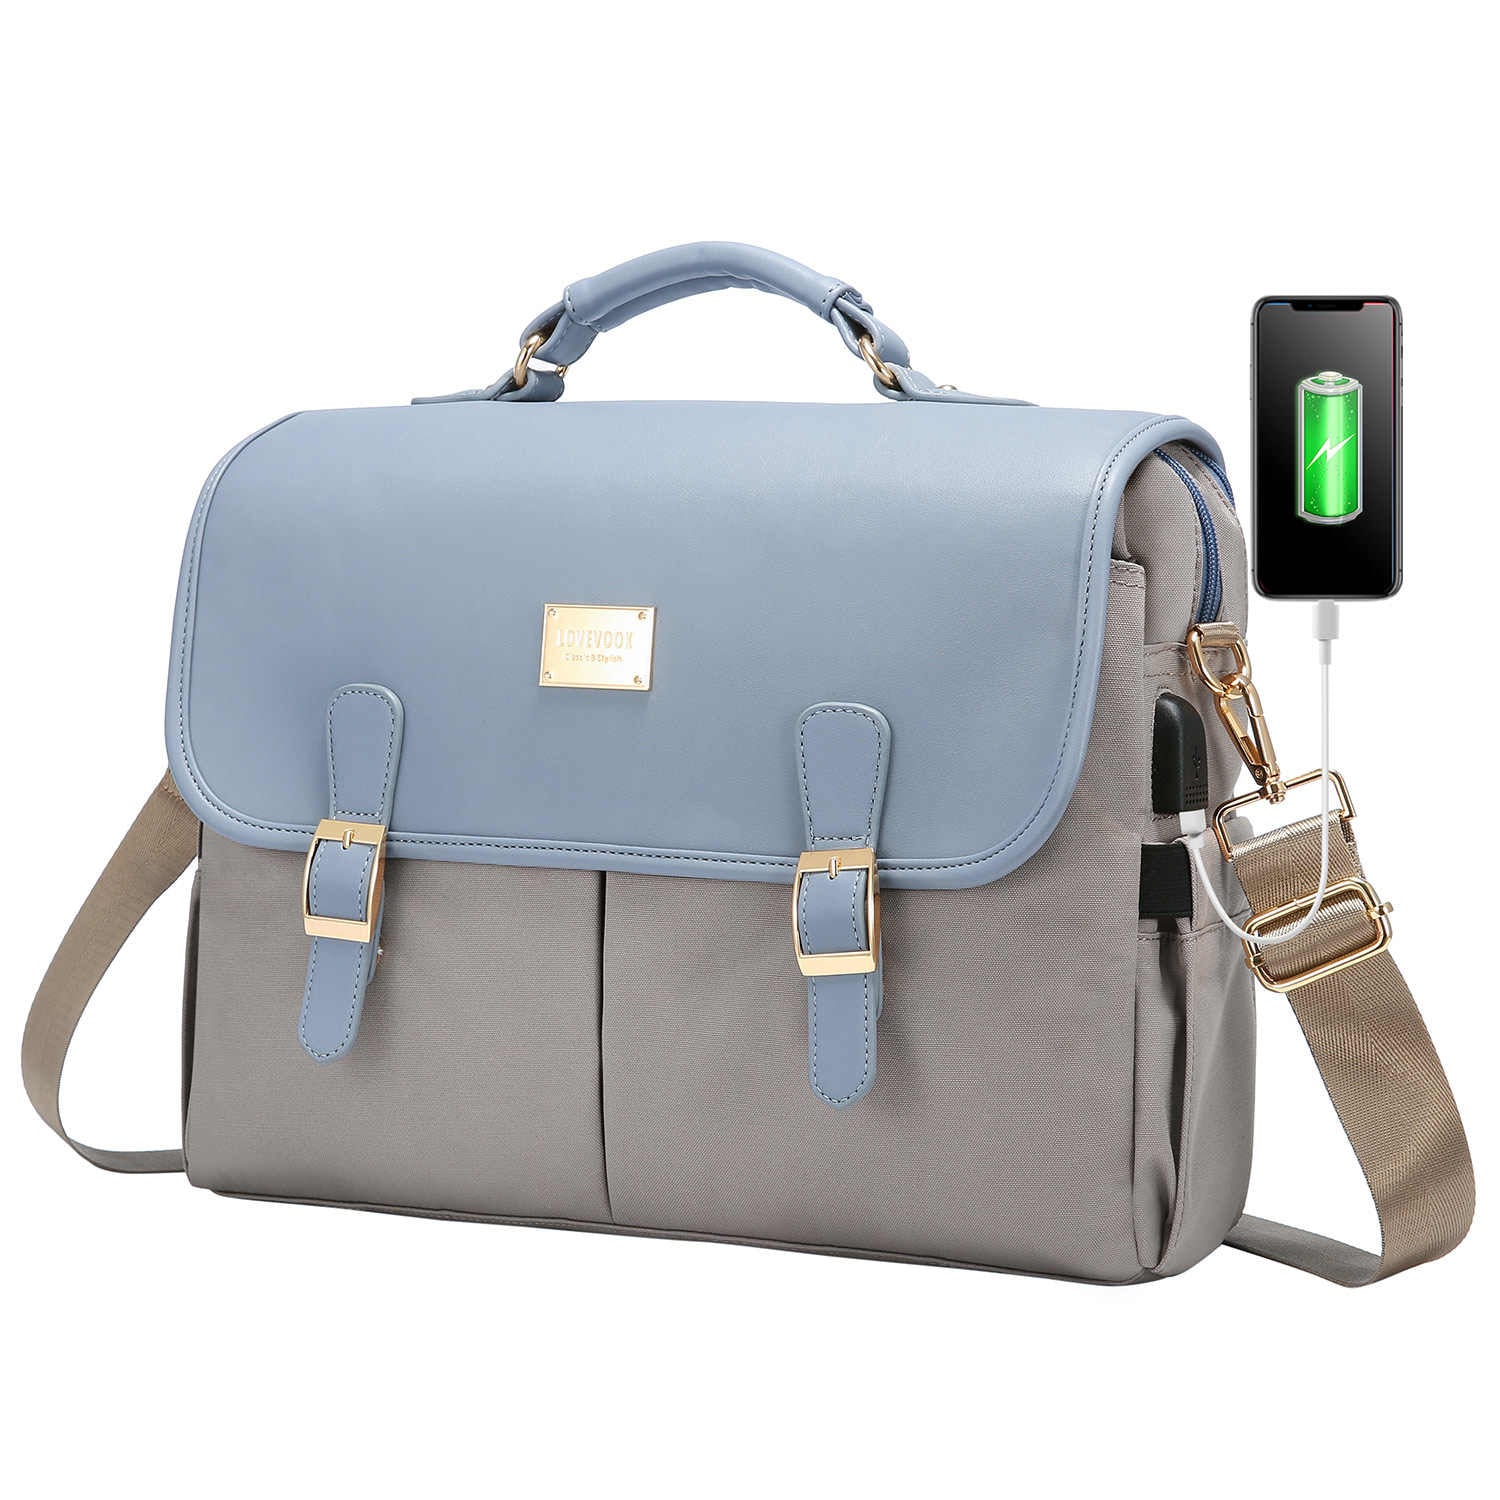 Corporate Laptop Bag – All About Annie